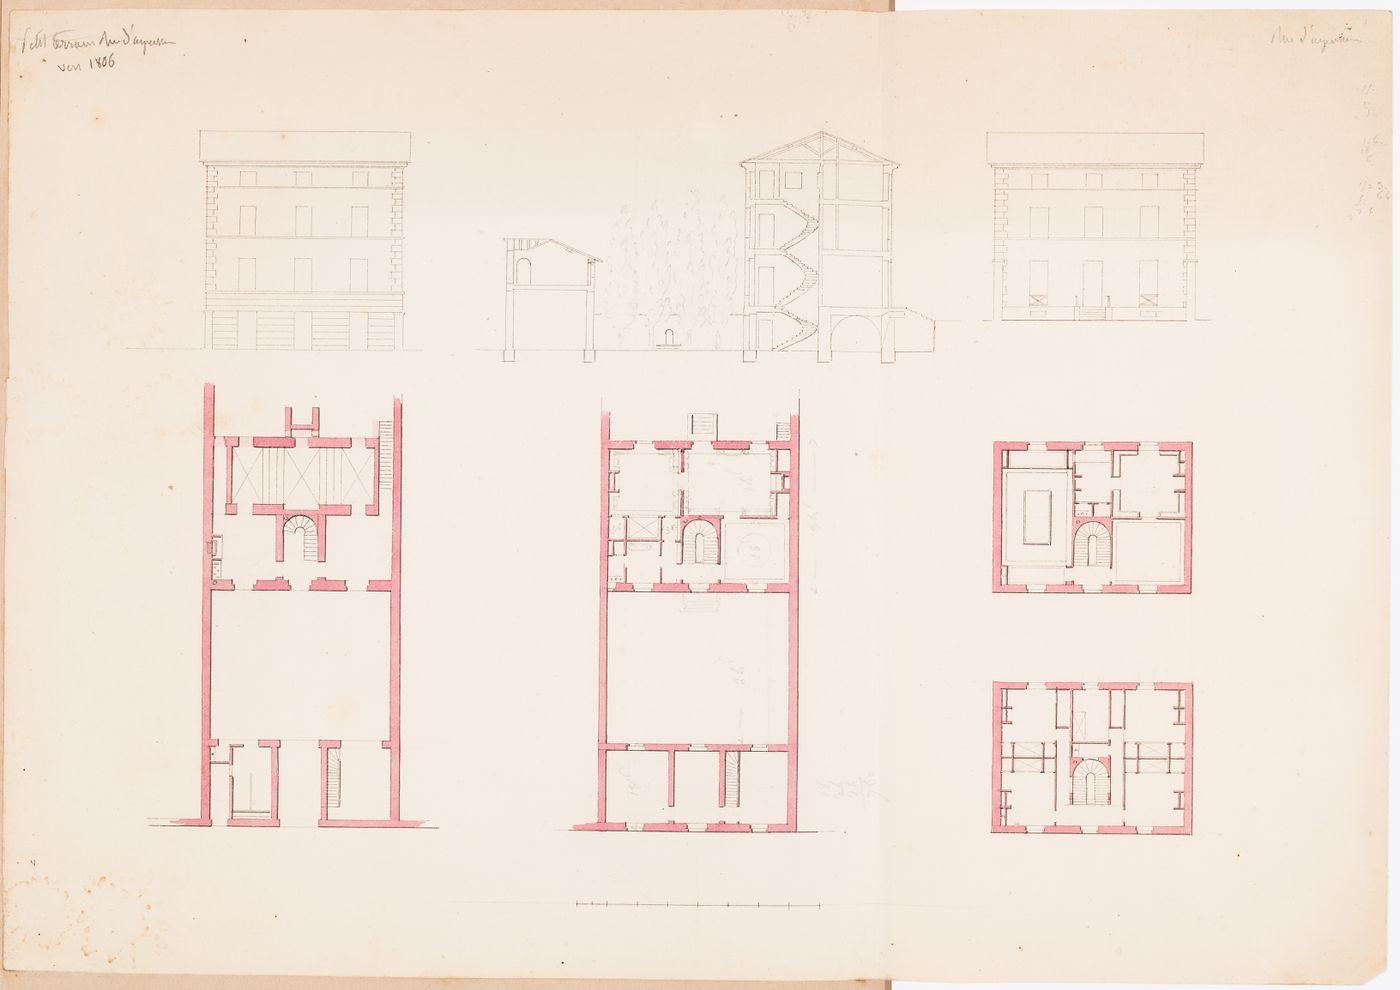 Section, plans and elevations for a house on rue d'Aguesseau, Paris